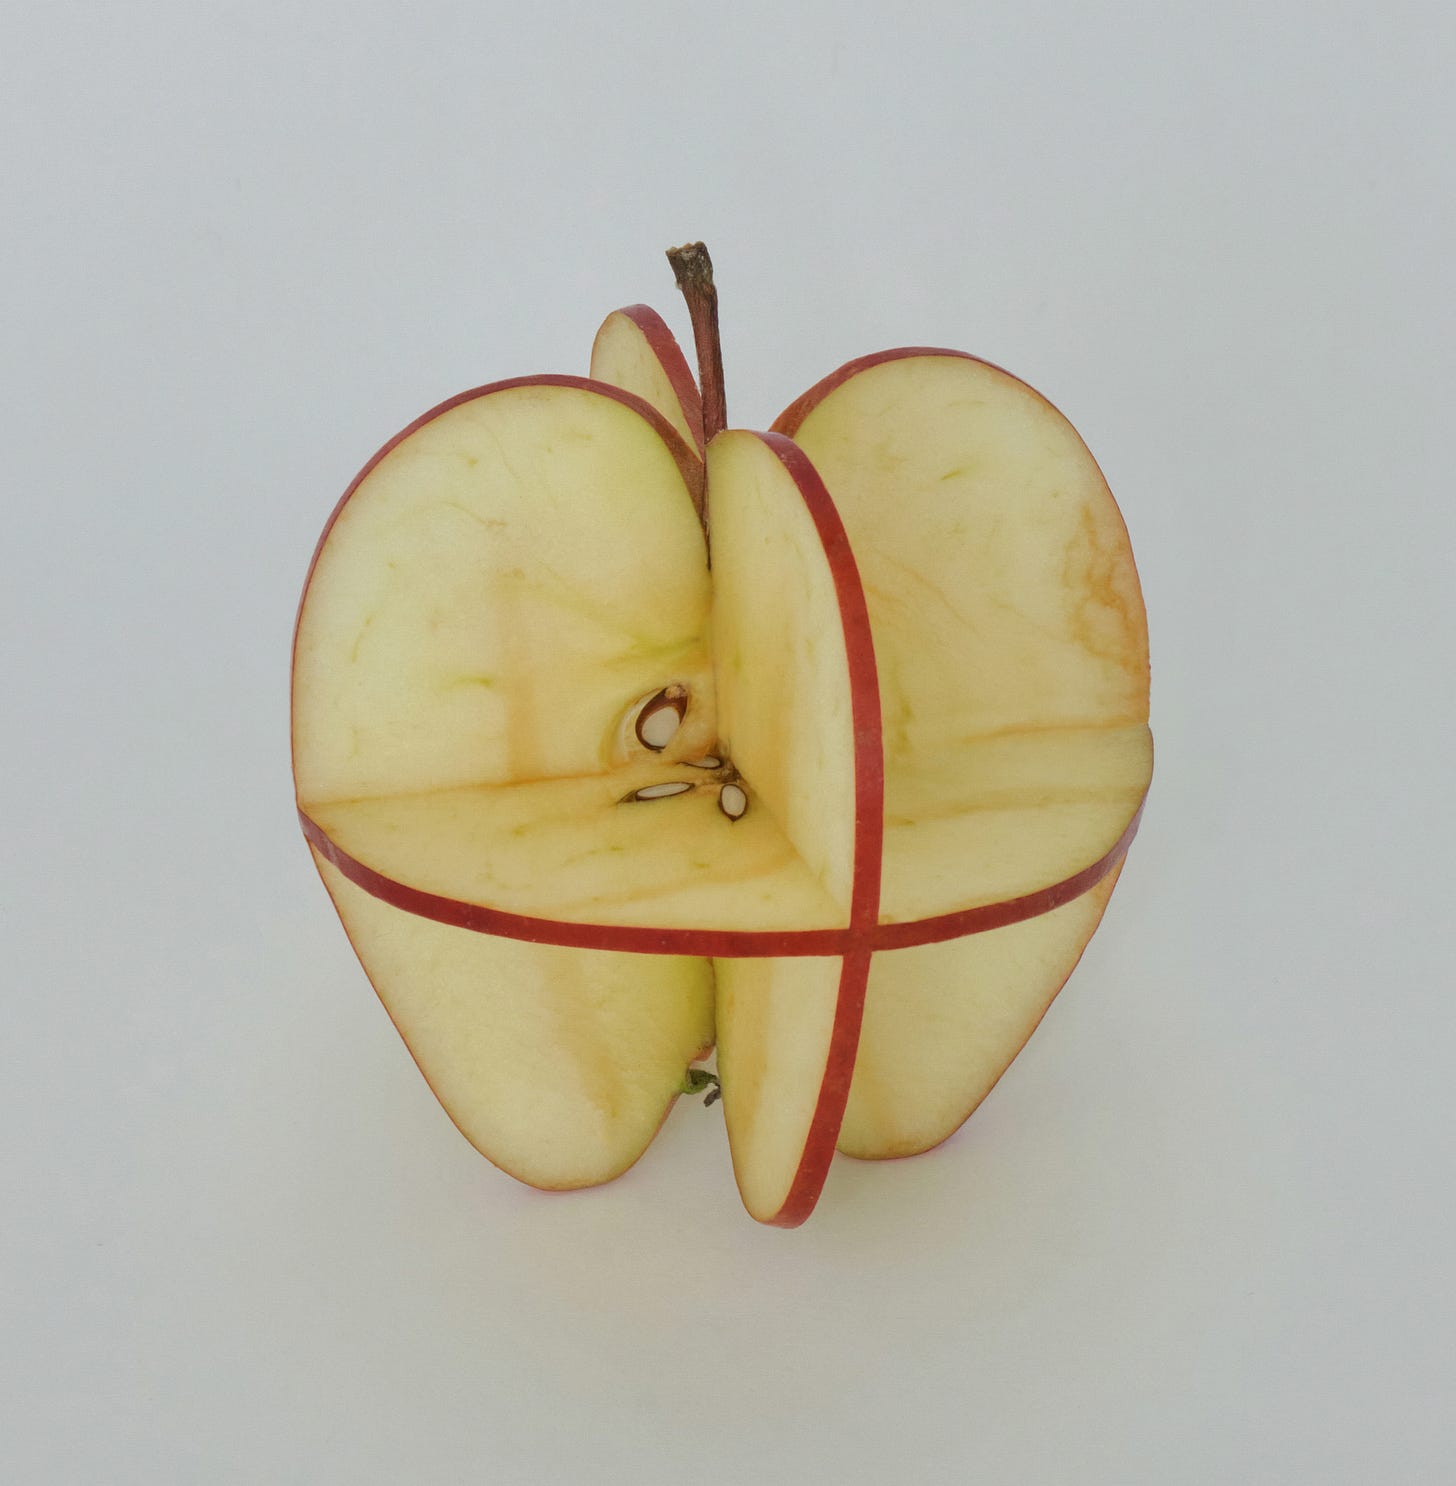 An intricately carved apple.